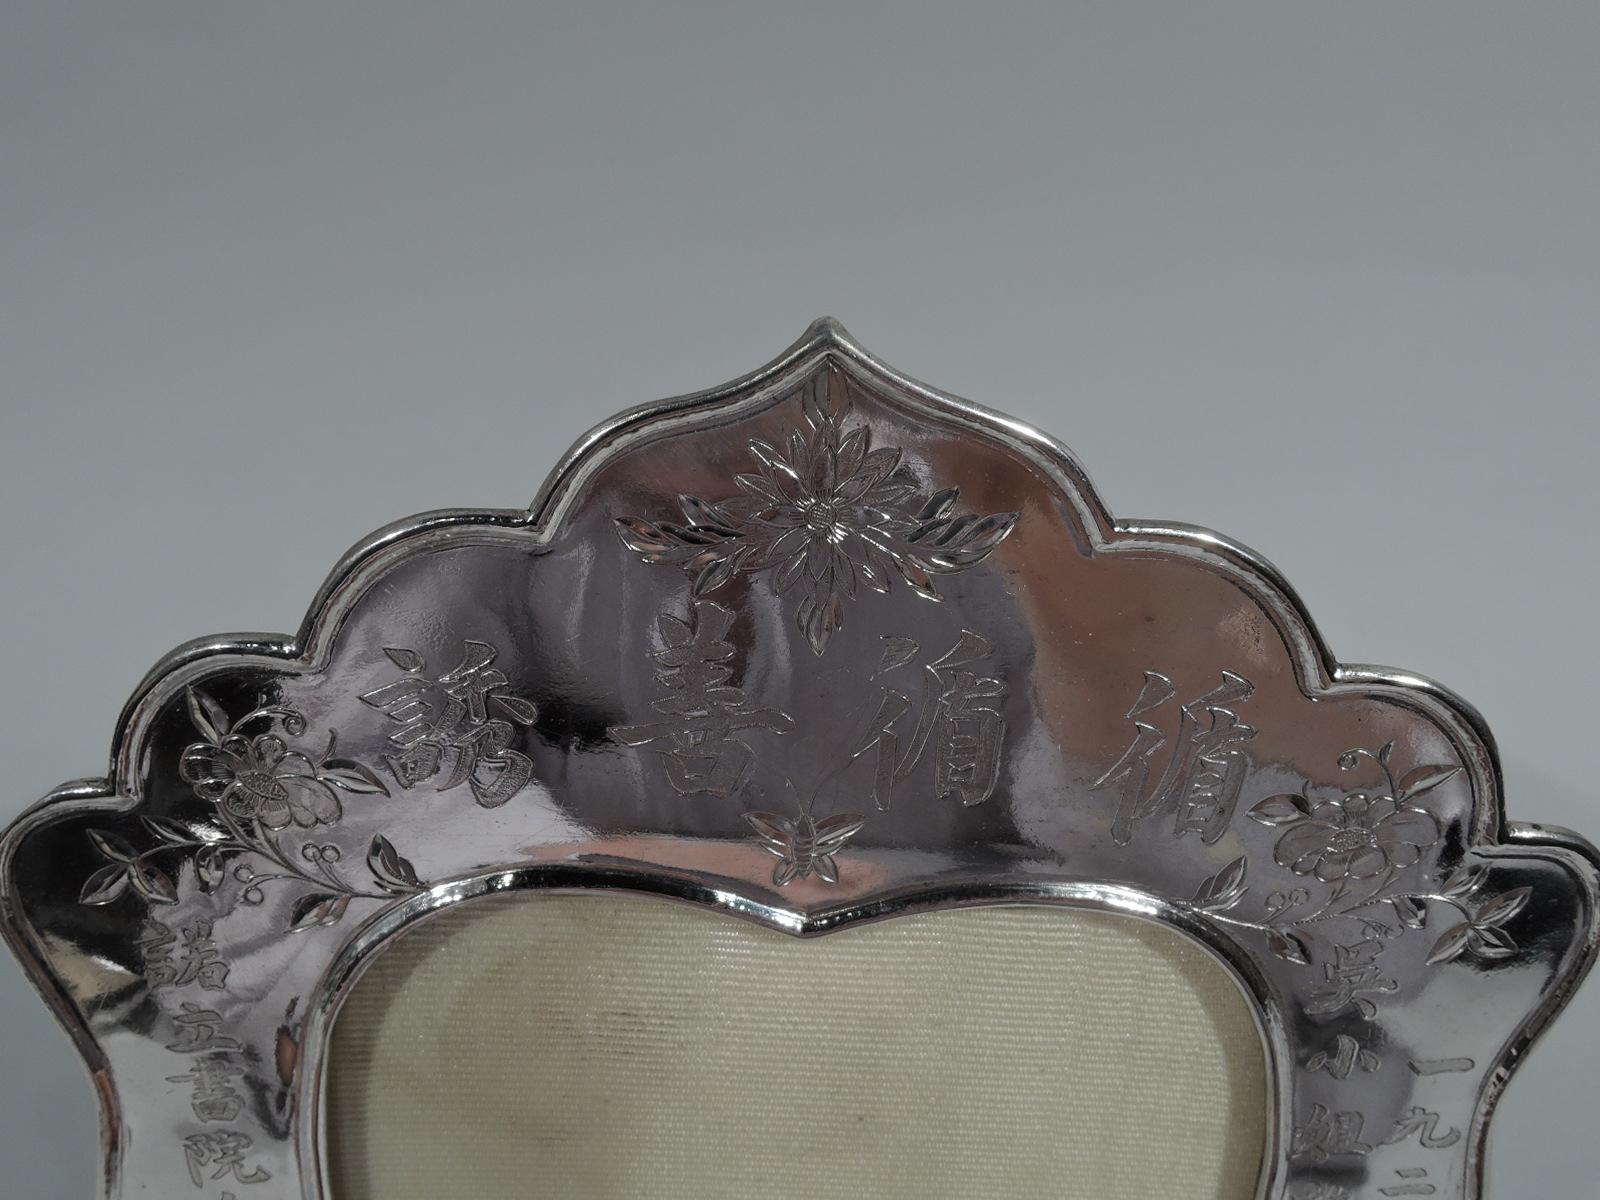 Chinese export silver frame, circa 1910. Heart-shaped window in shaped surround with scalloped ogee top and scrolled bracket feet. Engraved Chinese characters and blossoming branches. With glass, silk lining, and hinged wire support. Marked with